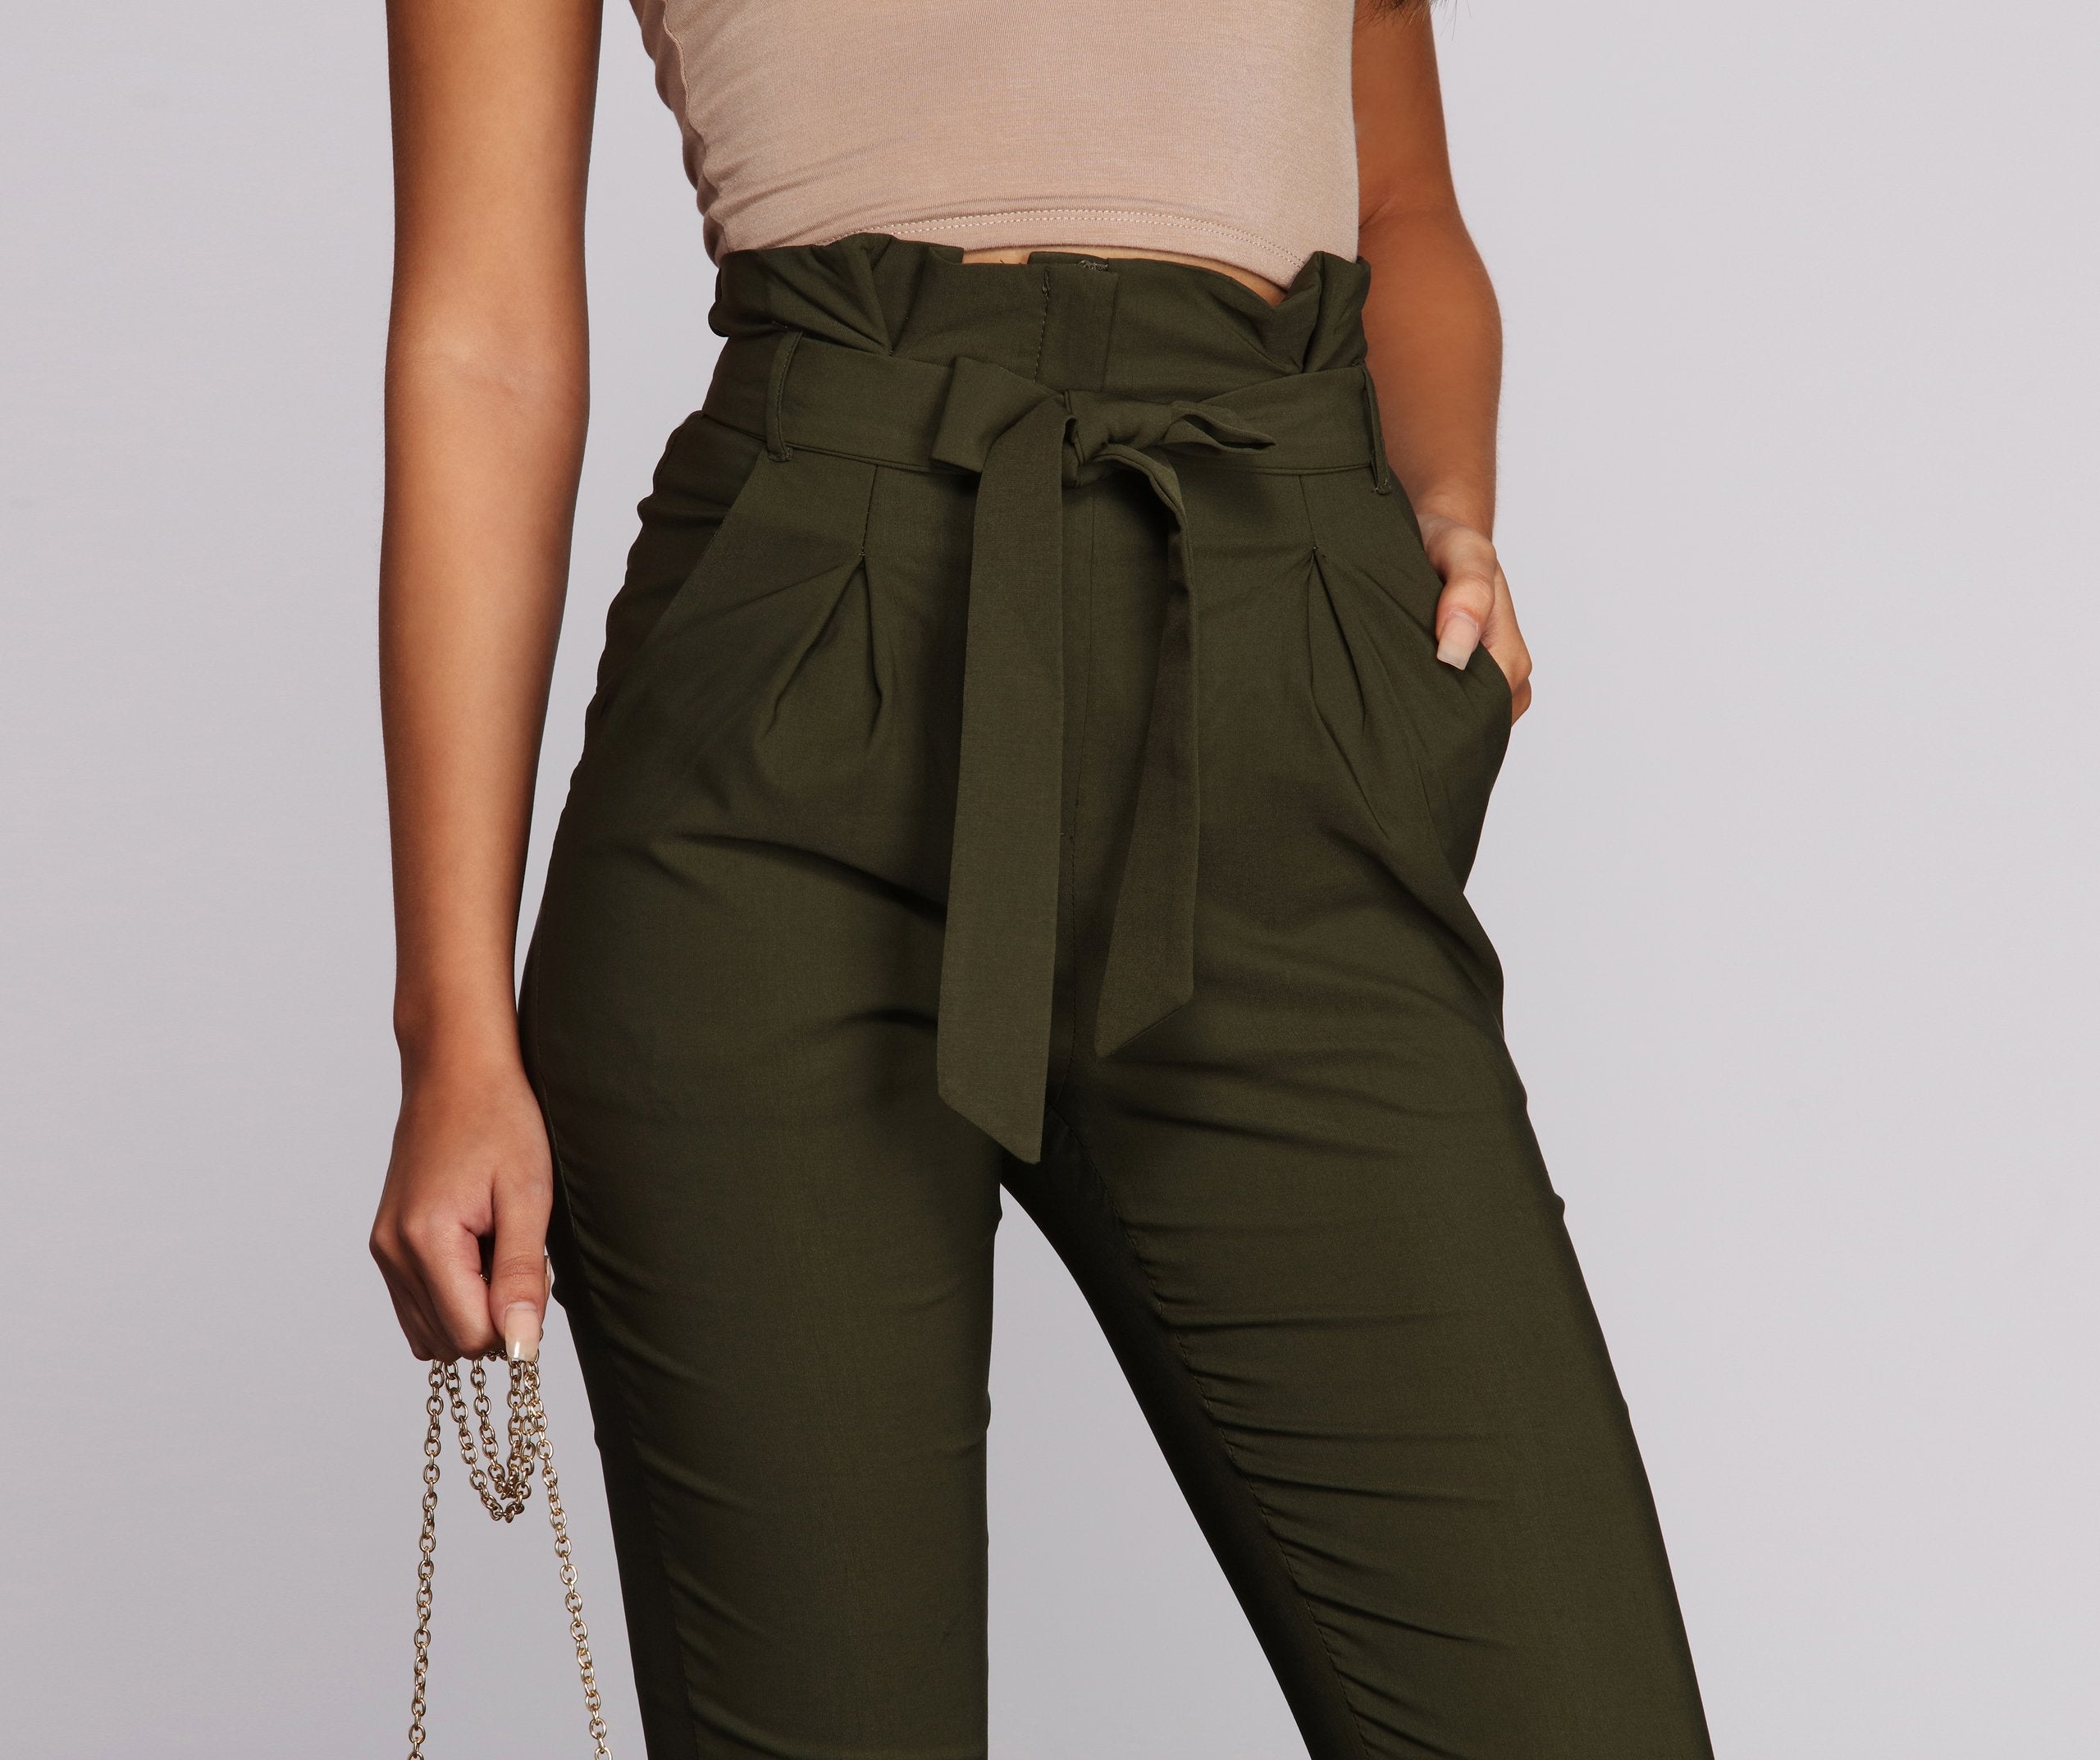 High Waist Paperbag Skinny Dress Pants - Lady Occasions